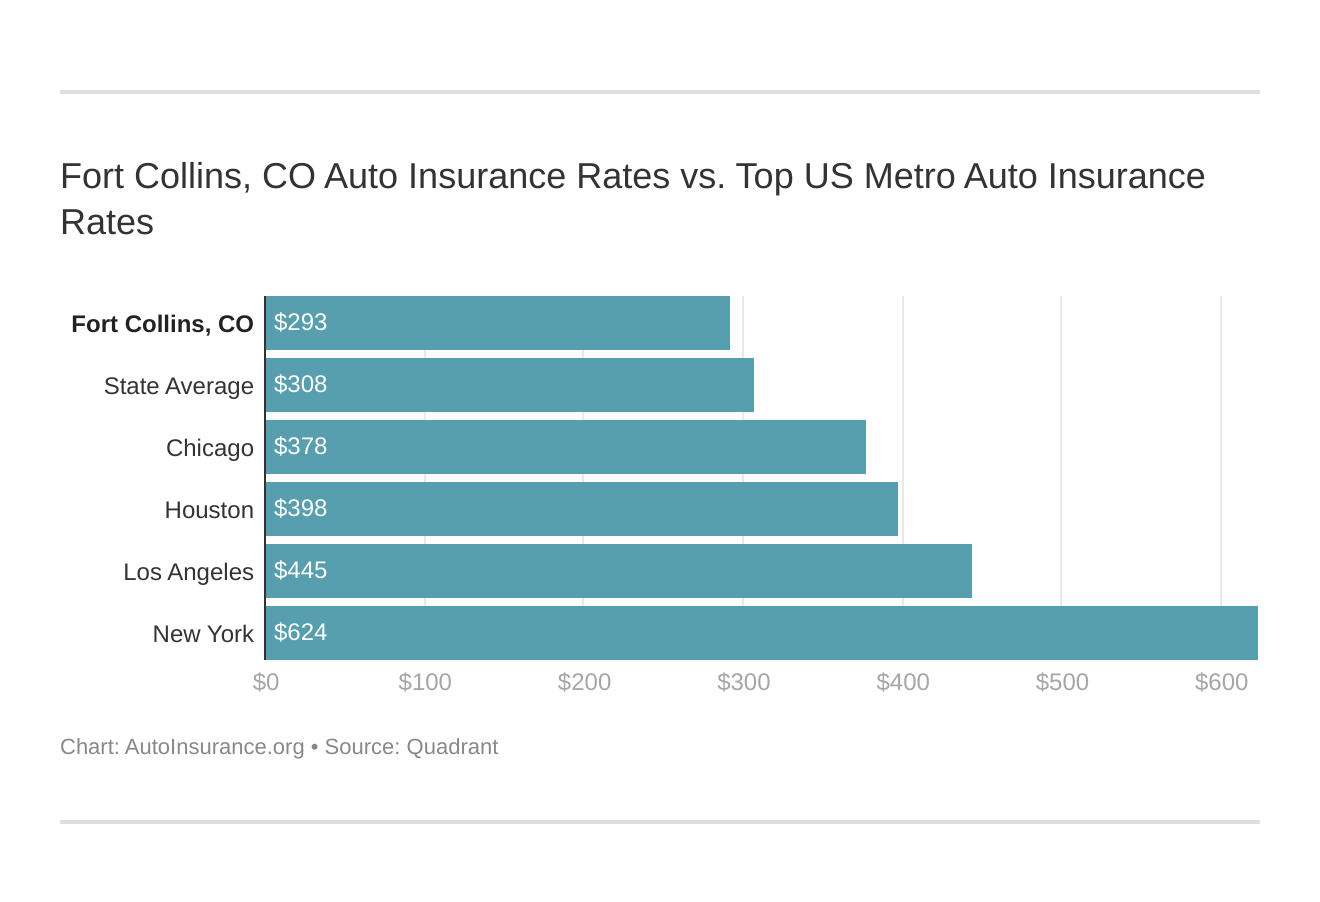 Fort Collins, CO Auto Insurance Rates vs. Top US Metro Auto Insurance Rates